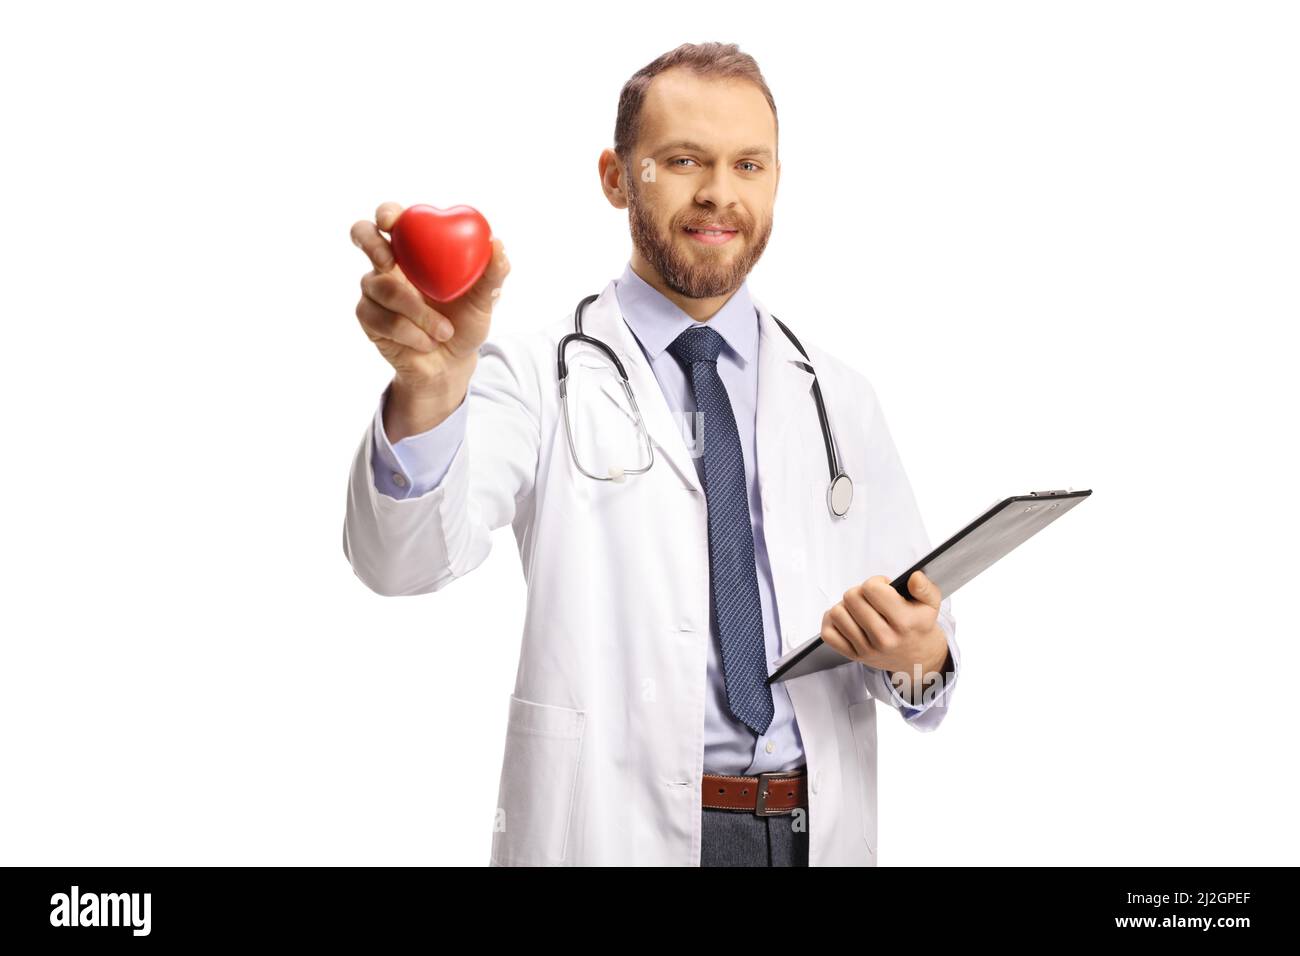 Young male cardiologist holding a red heart and looking at camera isolated on white background Stock Photo